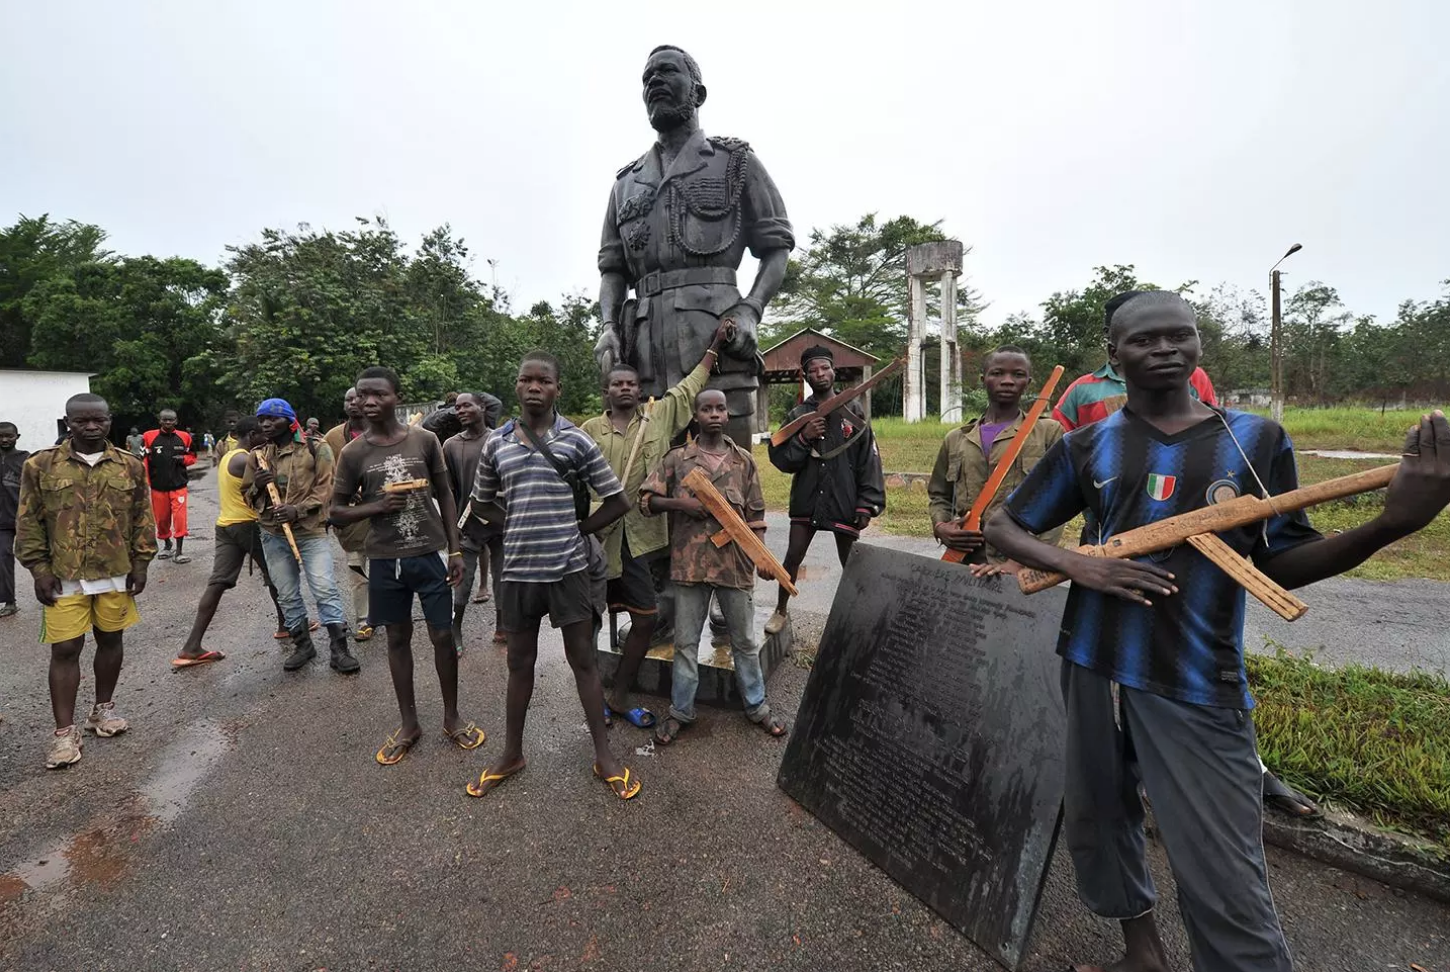 Ex-Seleka rebels with wooden weapons stand next to a statue of Emperor Bokassa at his Berengo palace in 2014. Image by Sia Kambou. Central African Republic, 2014. 